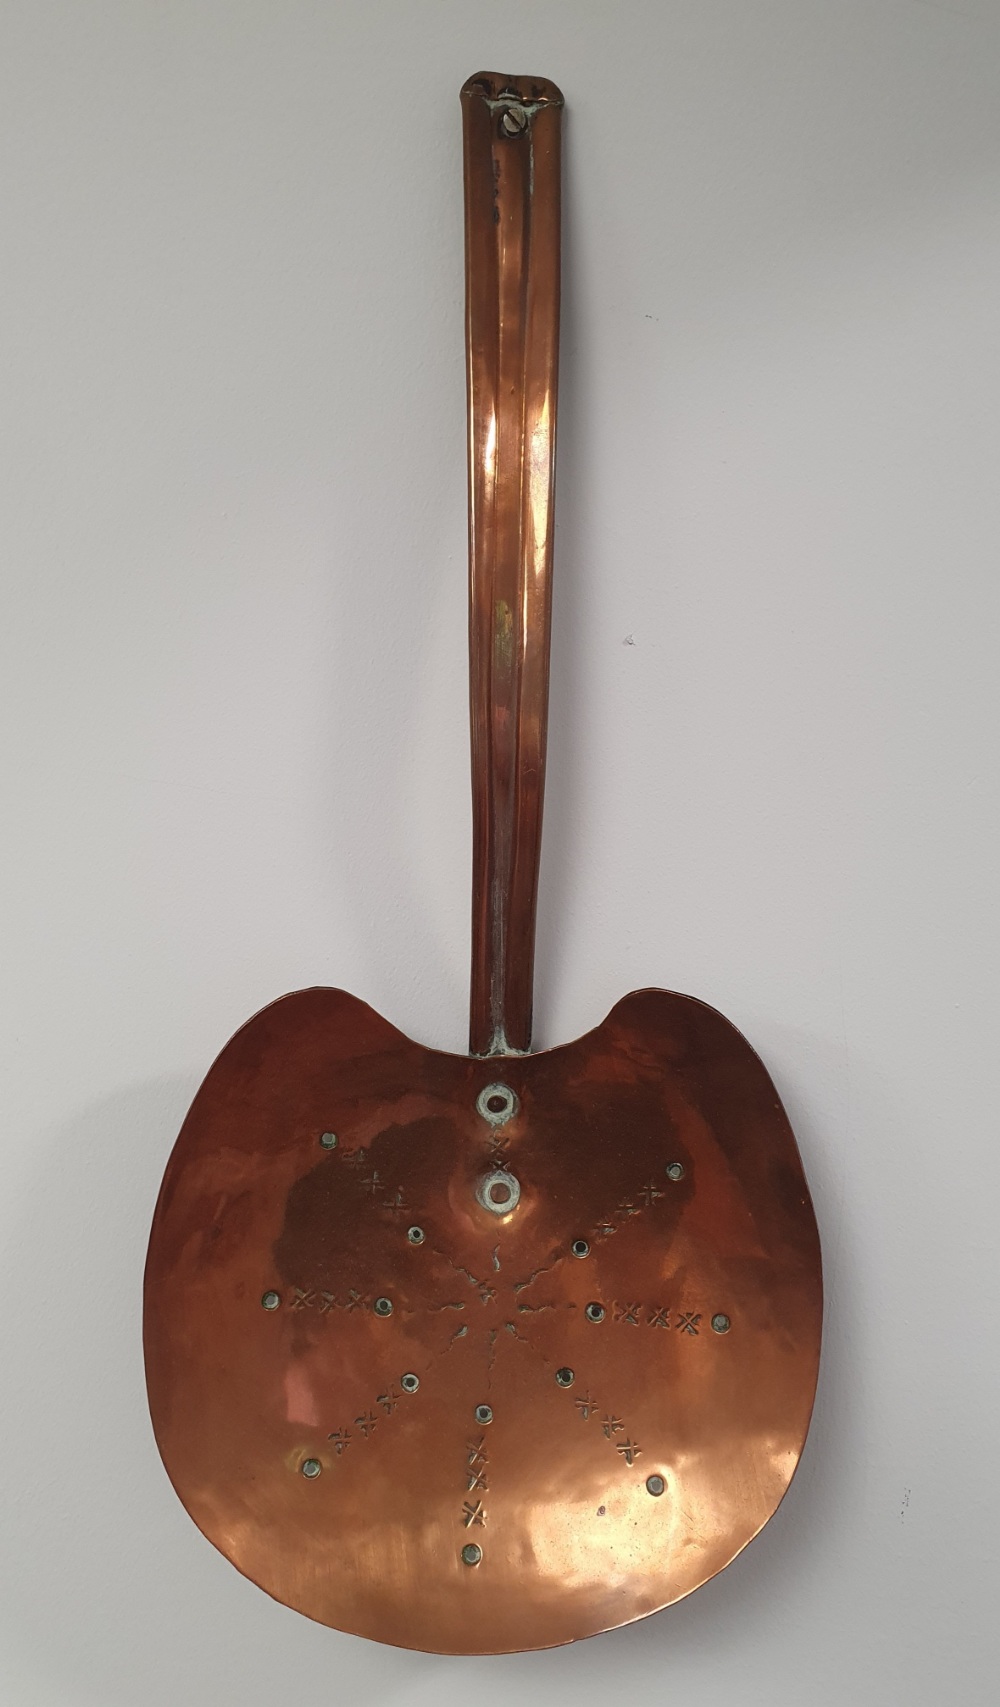 Arts and Crafts Beaten Copper Ladle measuring 16 inches